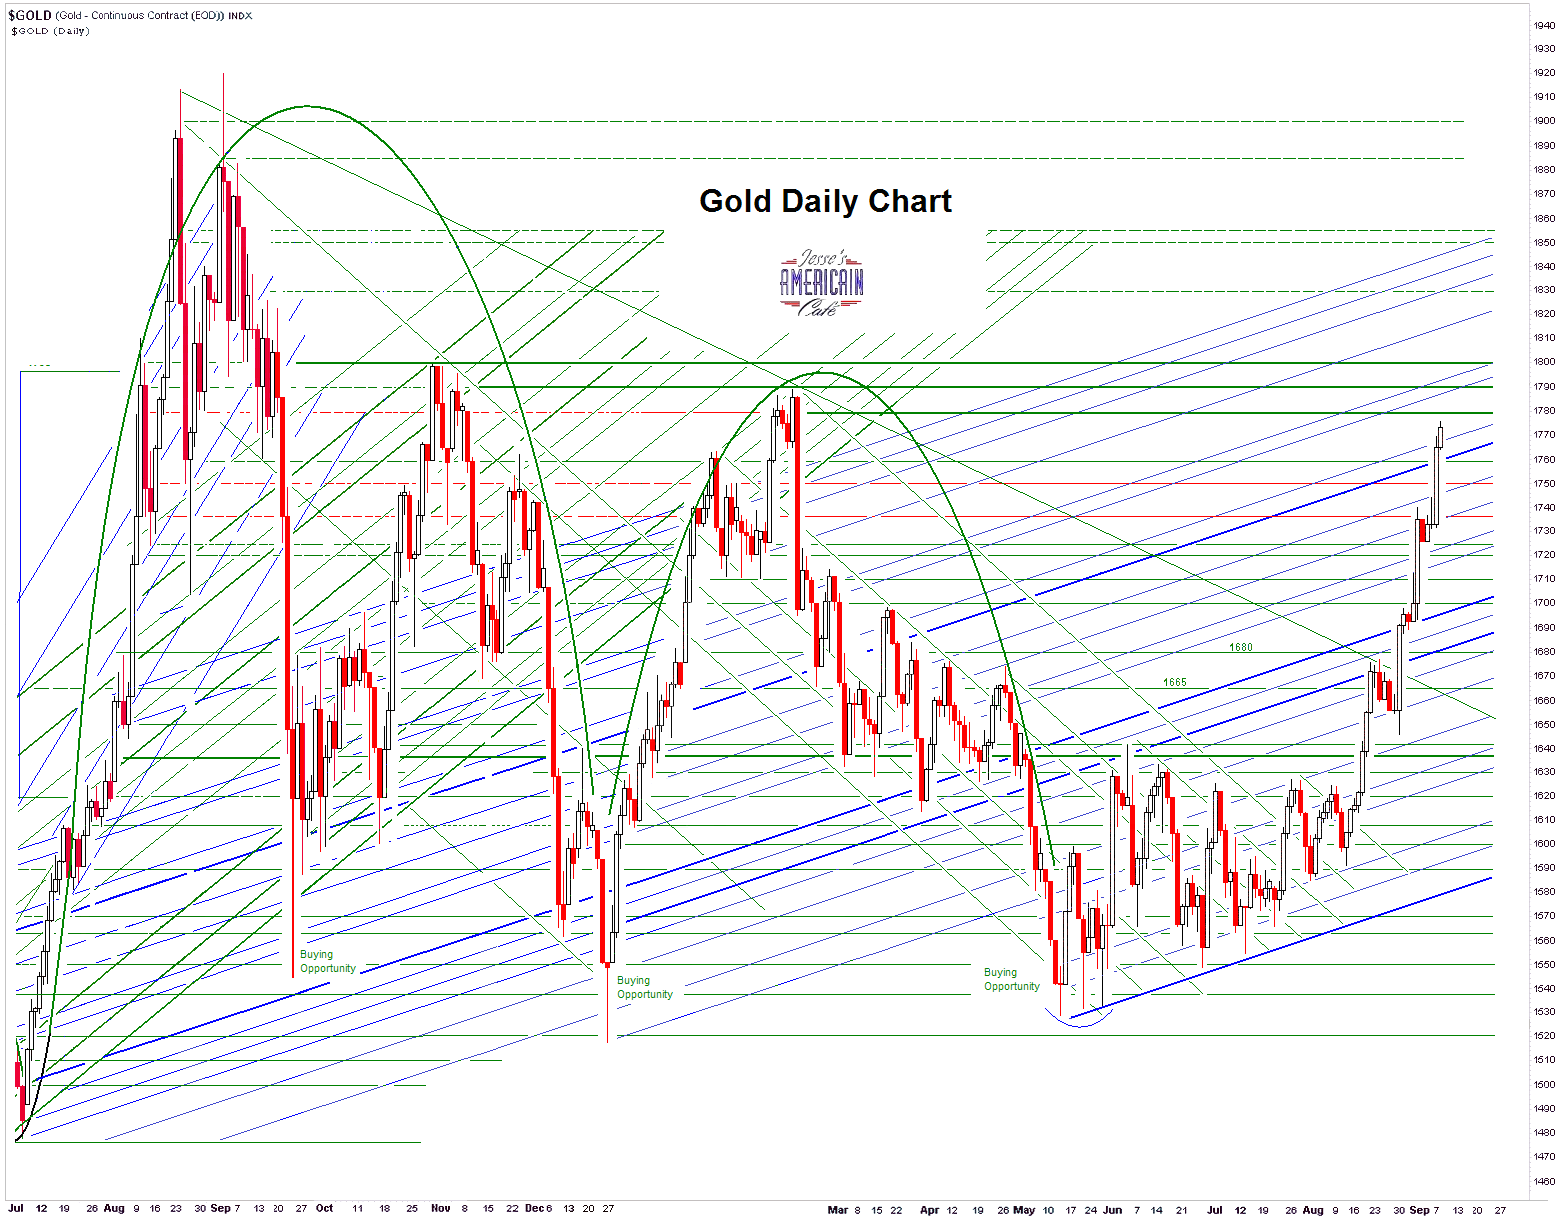 Jesse's Café Américain: Gold Daily and Silver Weekly Charts - So Far So ...